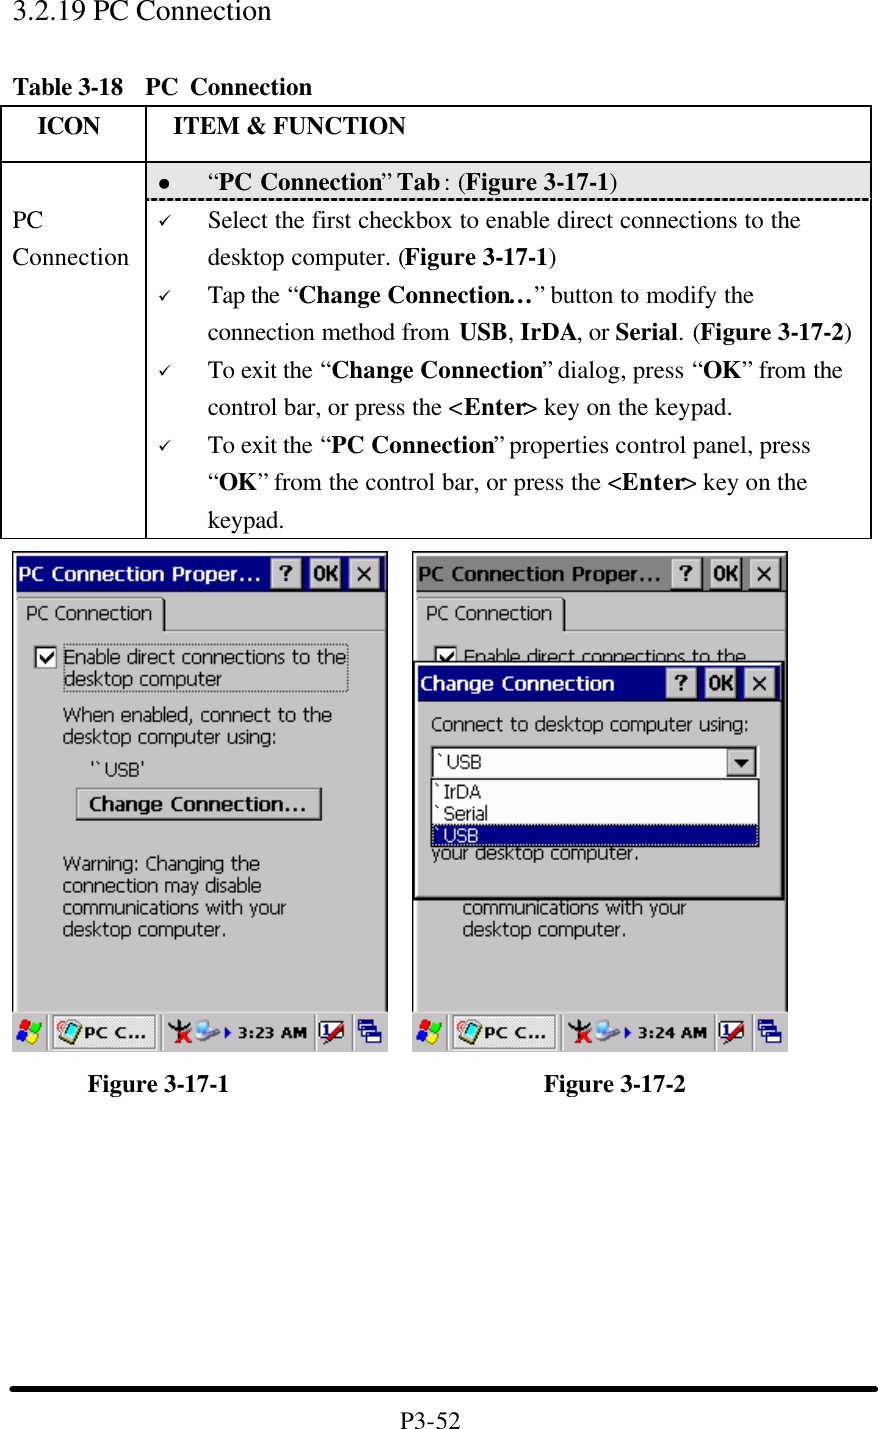 3.2.19 PC Connection    Table 3-18  PC Connection   ICON  ITEM &amp; FUNCTION l “PC Connection” Tab : (Figure 3-17-1)  PC Connection ü Select the first checkbox to enable direct connections to the desktop computer. (Figure 3-17-1) ü Tap the “Change Connection…” button to modify the connection method from USB, IrDA, or Serial. (Figure 3-17-2) ü To exit the “Change Connection” dialog, press “OK” from the control bar, or press the &lt;Enter&gt; key on the keypad. ü To exit the “PC Connection” properties control panel, press “OK” from the control bar, or press the &lt;Enter&gt; key on the keypad.           Figure 3-17-1                         Figure 3-17-2         P3-52 